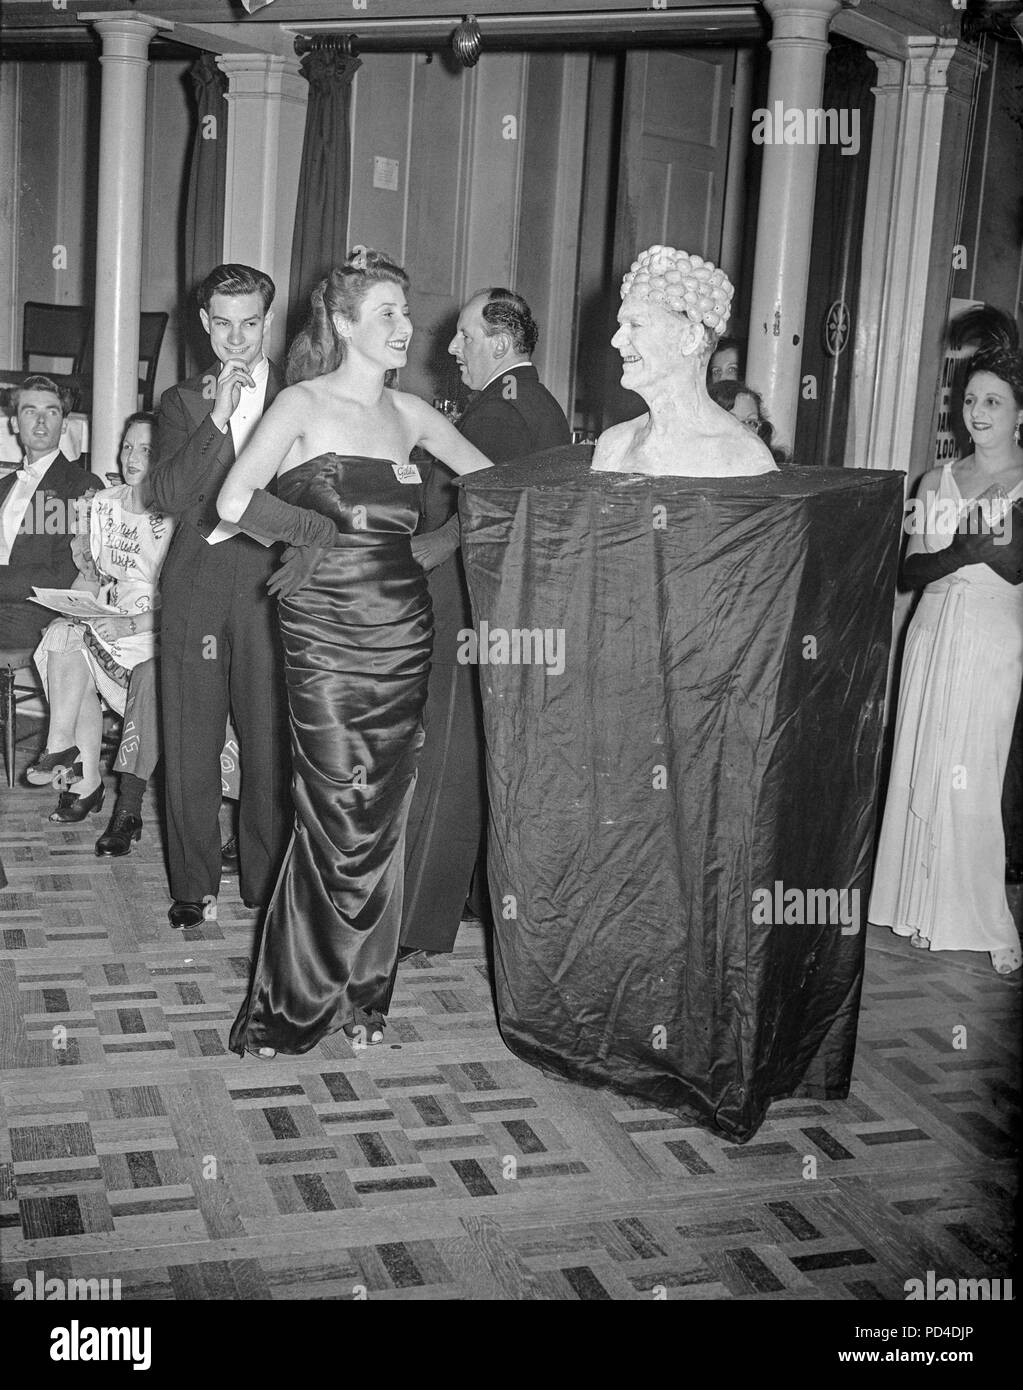 28th September 1946. Royal Albert Hall, London, England. A Five Arts Ball. The first full scale fancy dress ball since the end of the Second World War, took place in aid of the Royal Free Hospital. Photo shows Miss Audrey Burdock, dressed as Gilda, surveying a 'Plaster Bust', Mr. J. Higgins. Stock Photo